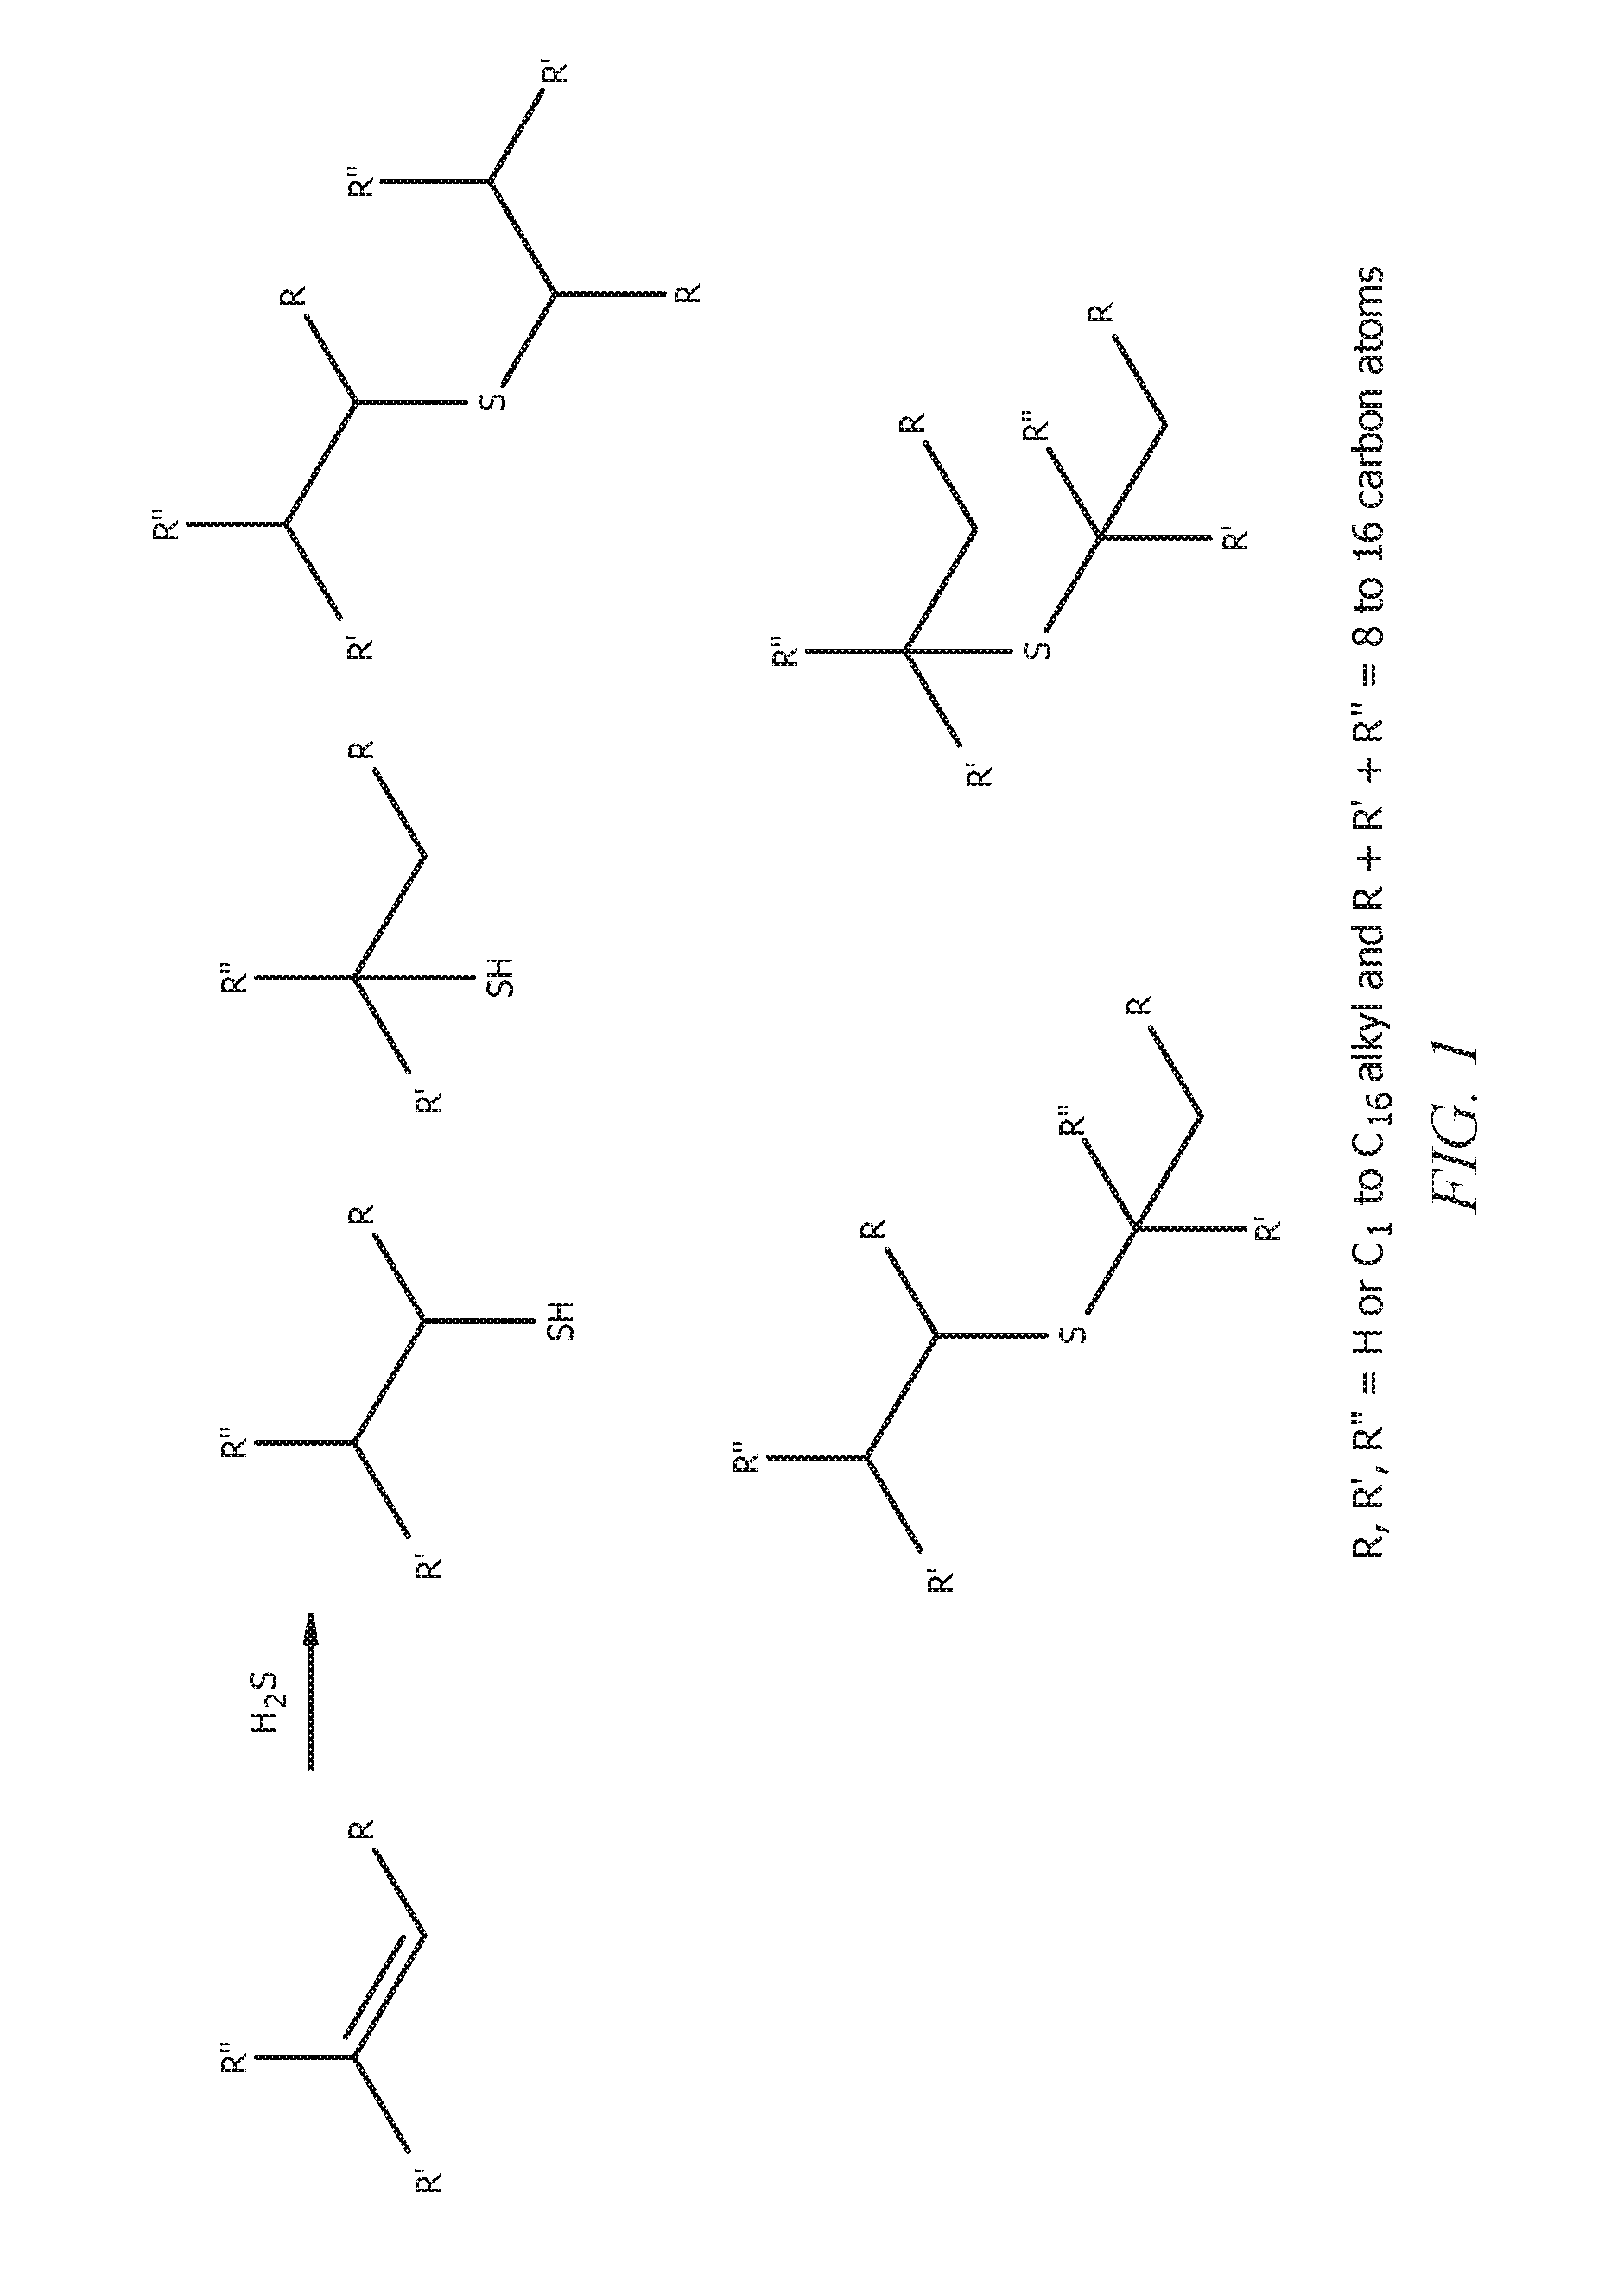 Mixed decyl mercaptans compositions and use thereof as chain transfer agents